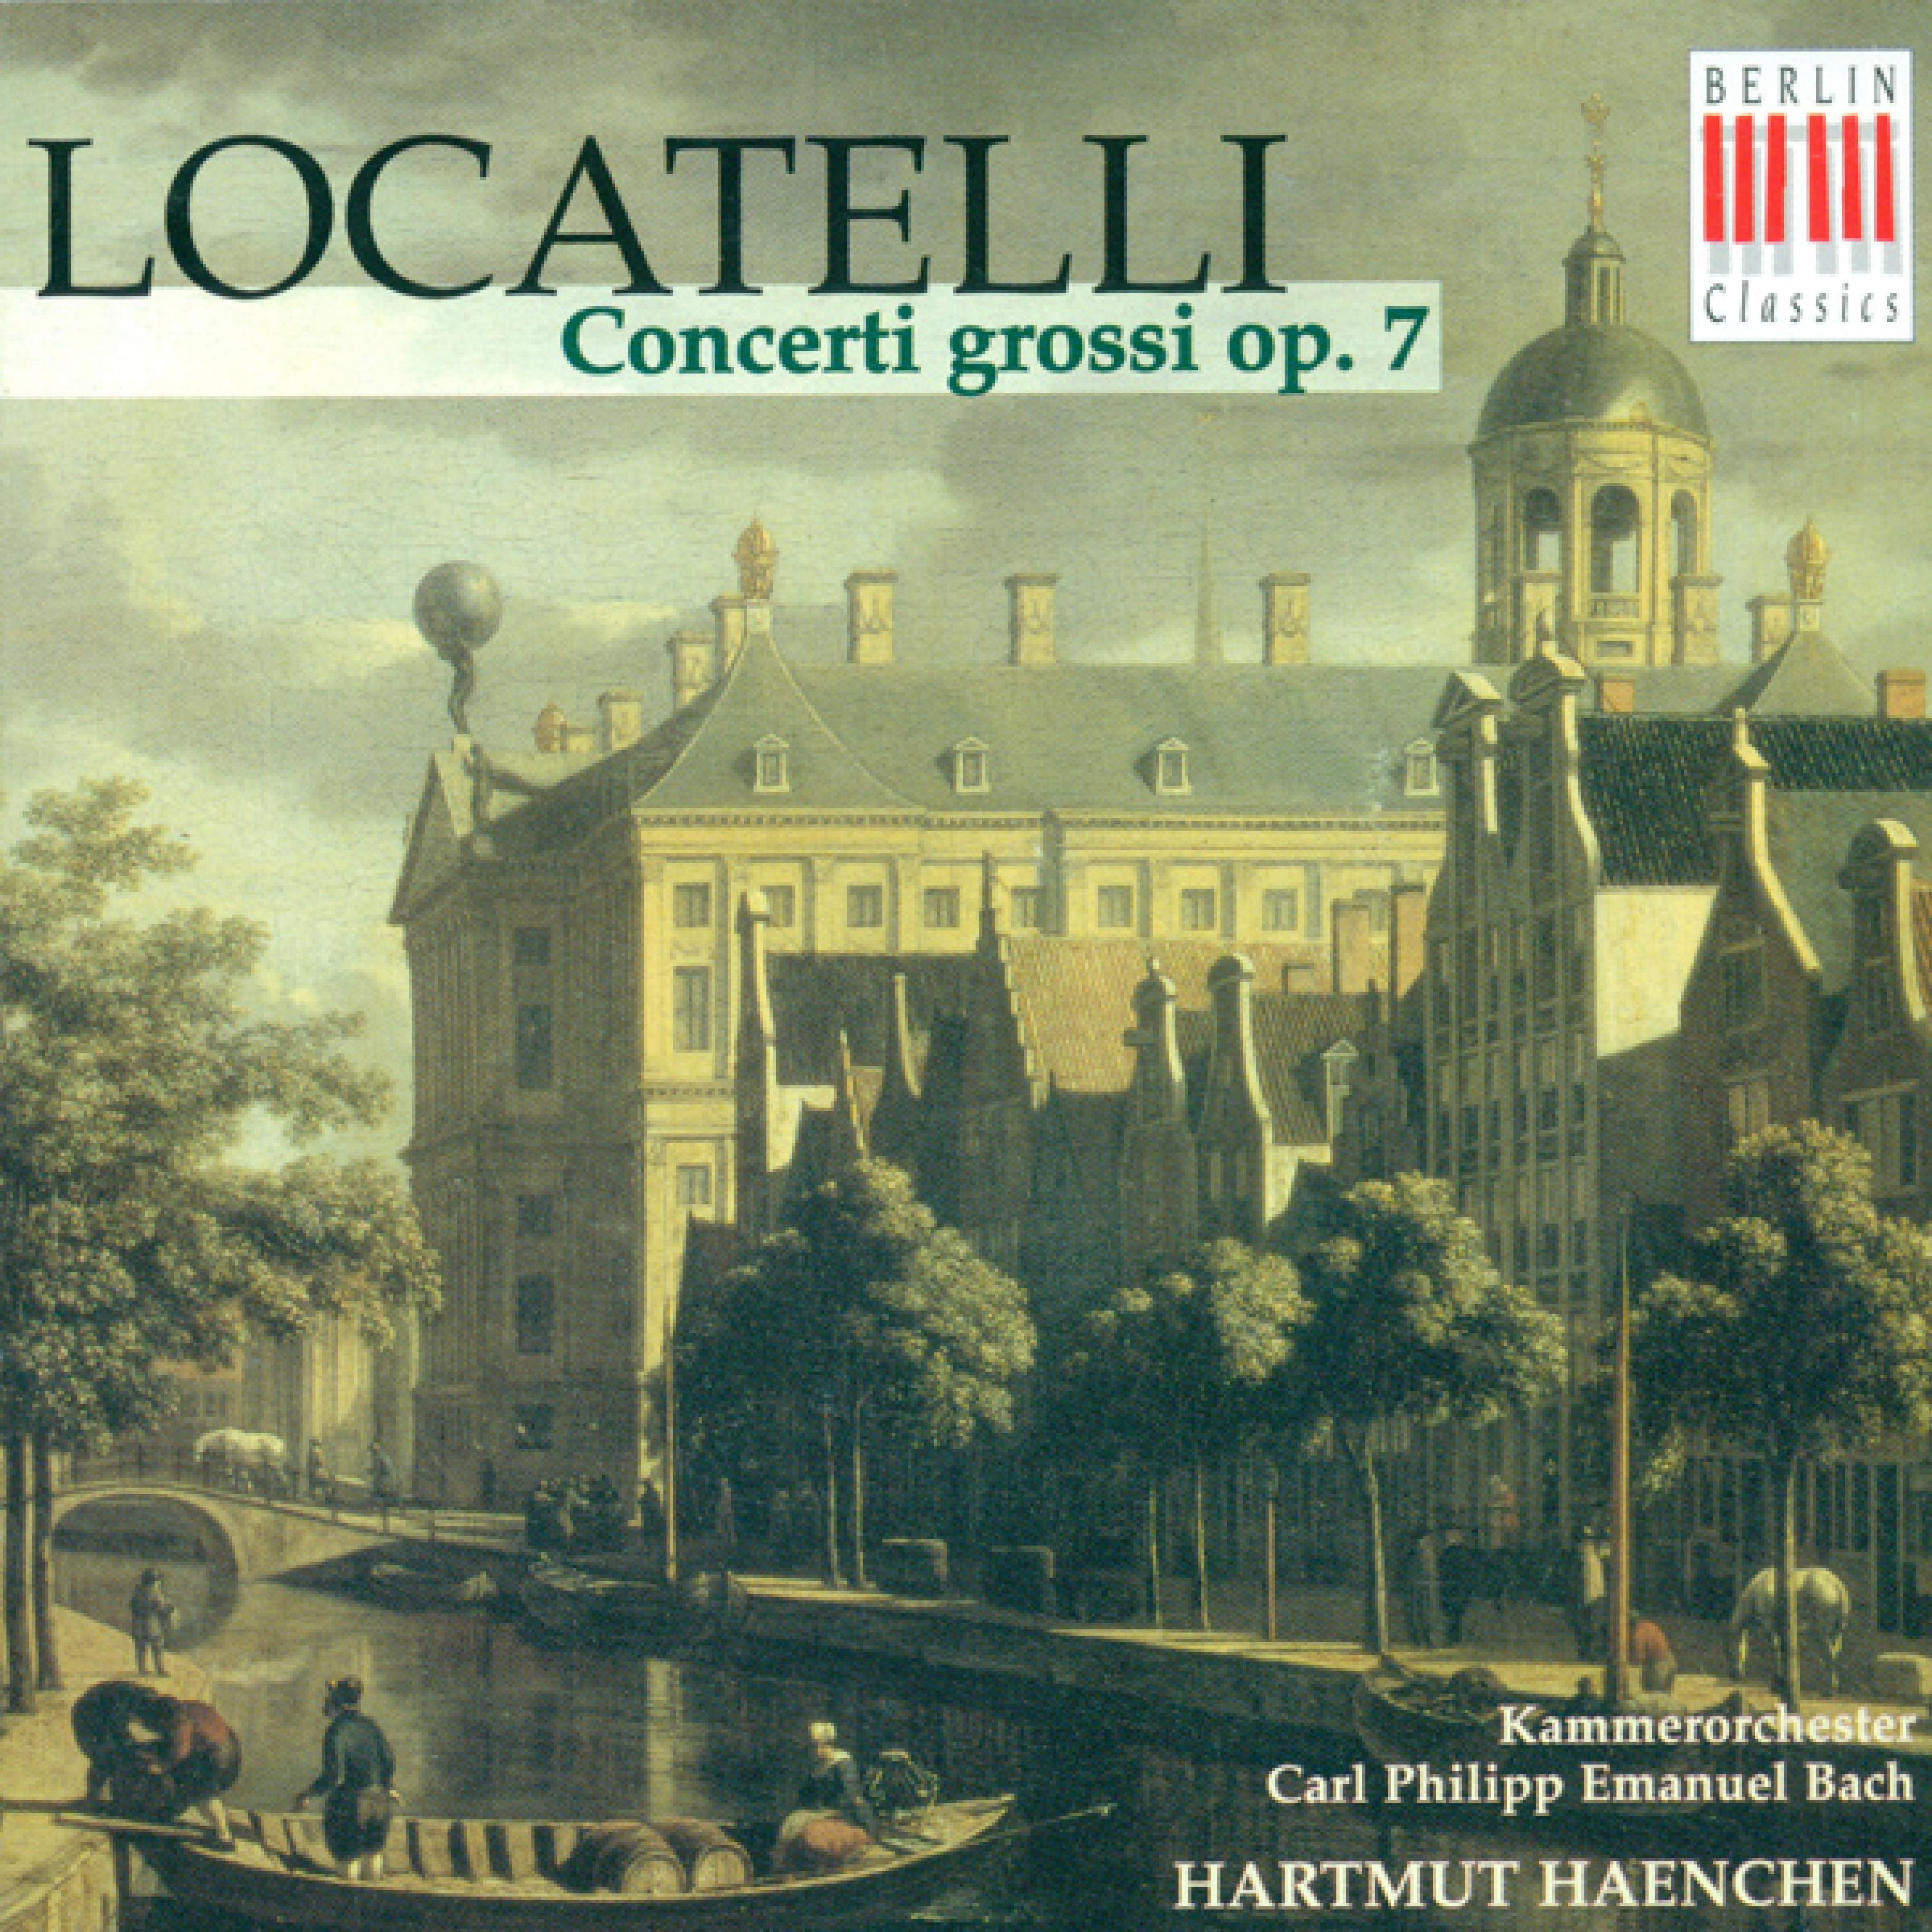 Concerto Grosso in B-Flat Major, Op. 7/2: IV. Cantabile